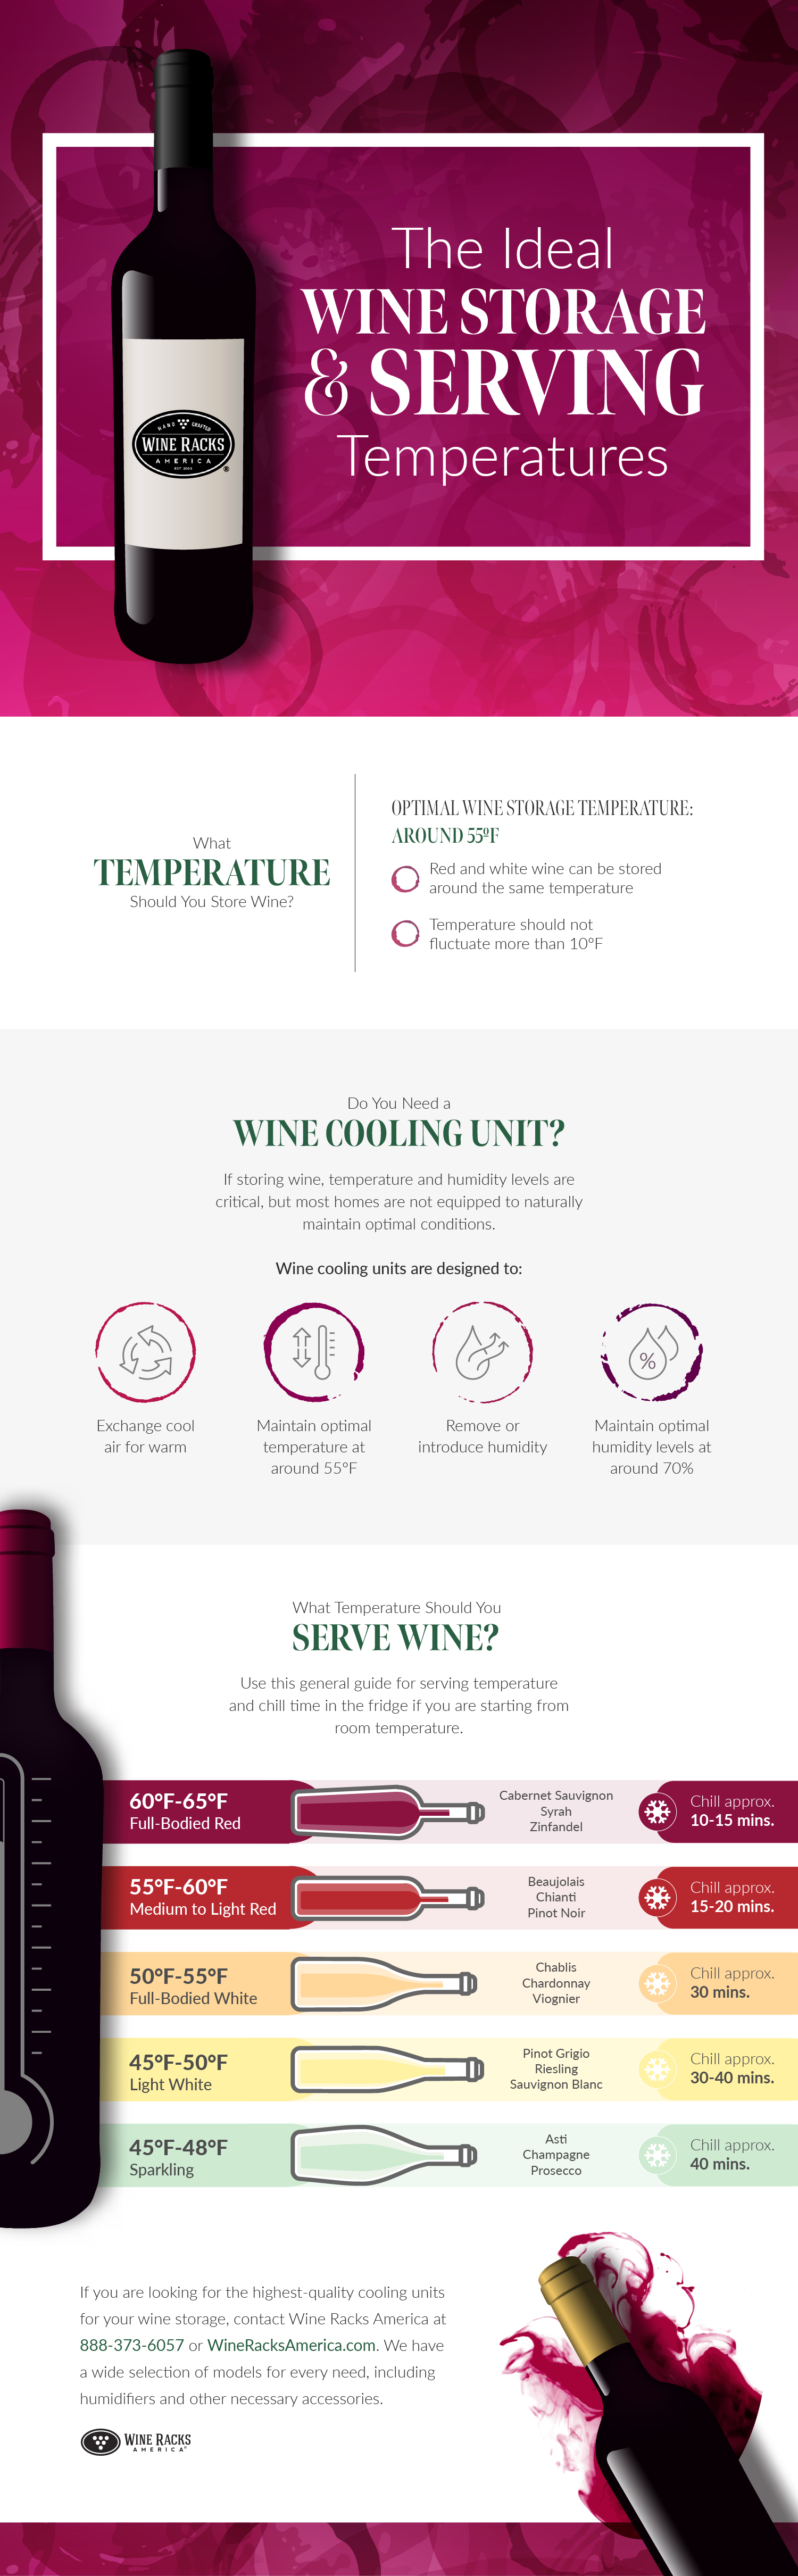 Wine Storage and Serving Temperatures Infographic